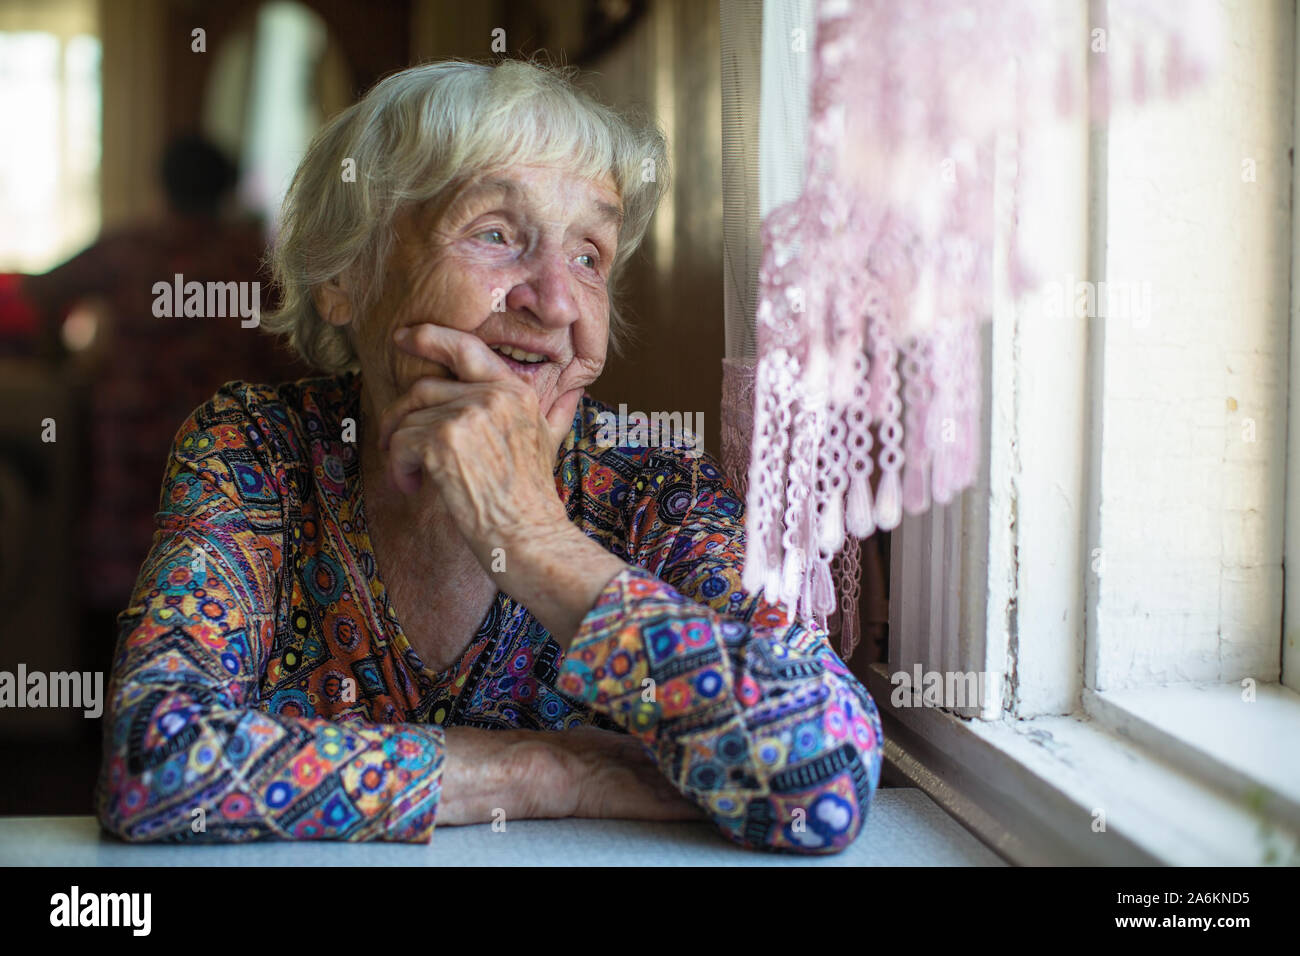 Portrait of an elderly woman, 85-90 years old. Stock Photo